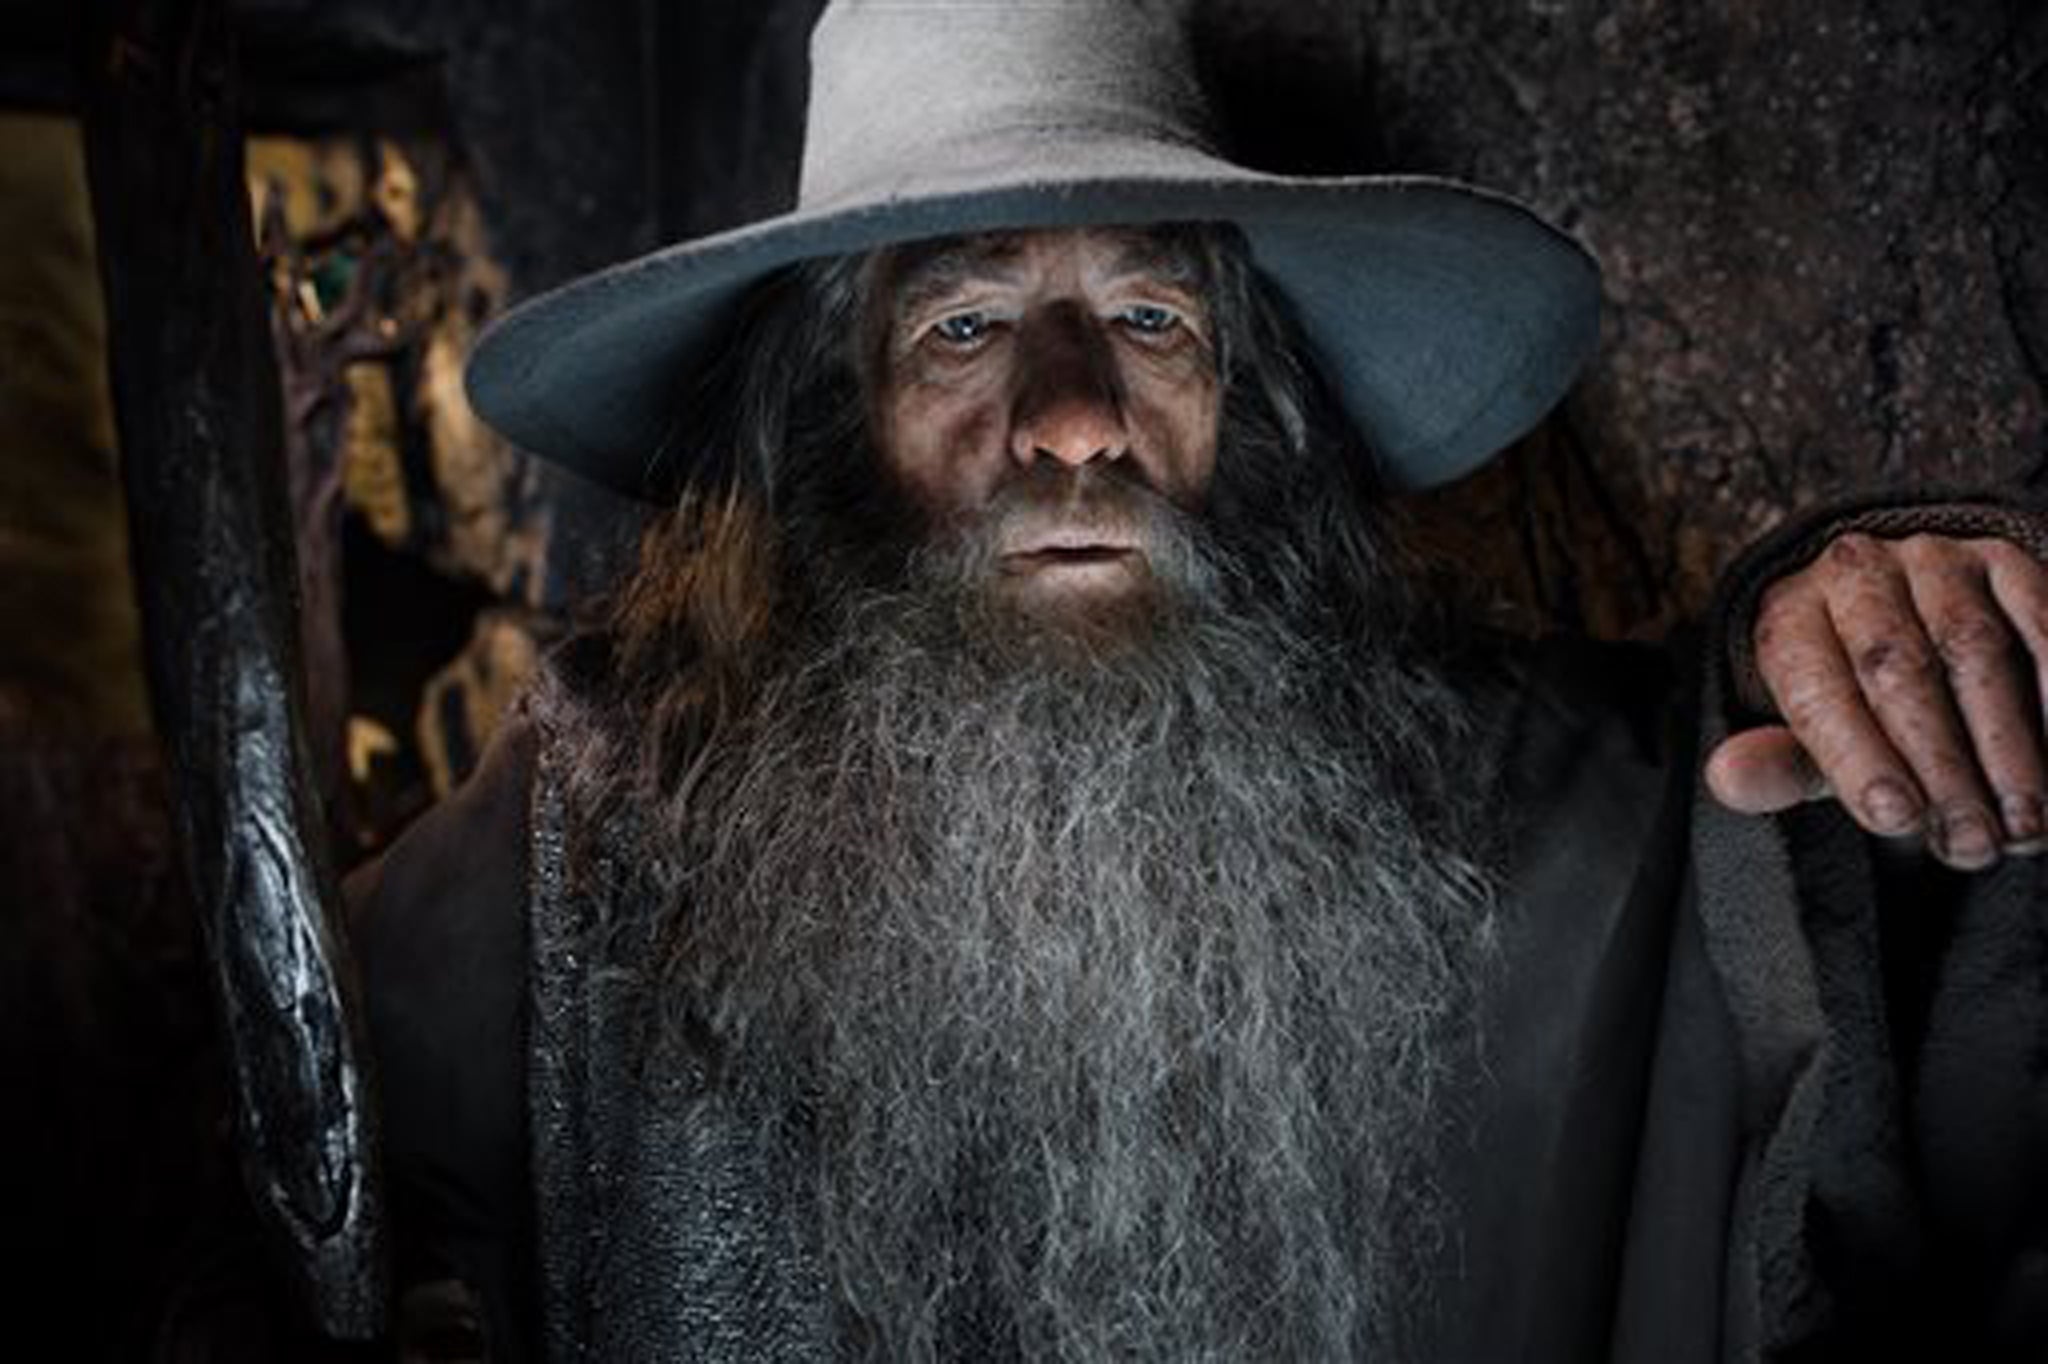 Ian McKellen, here as Gandalf in The Desolation of Smaug, will return for The Battle of the Five Armies